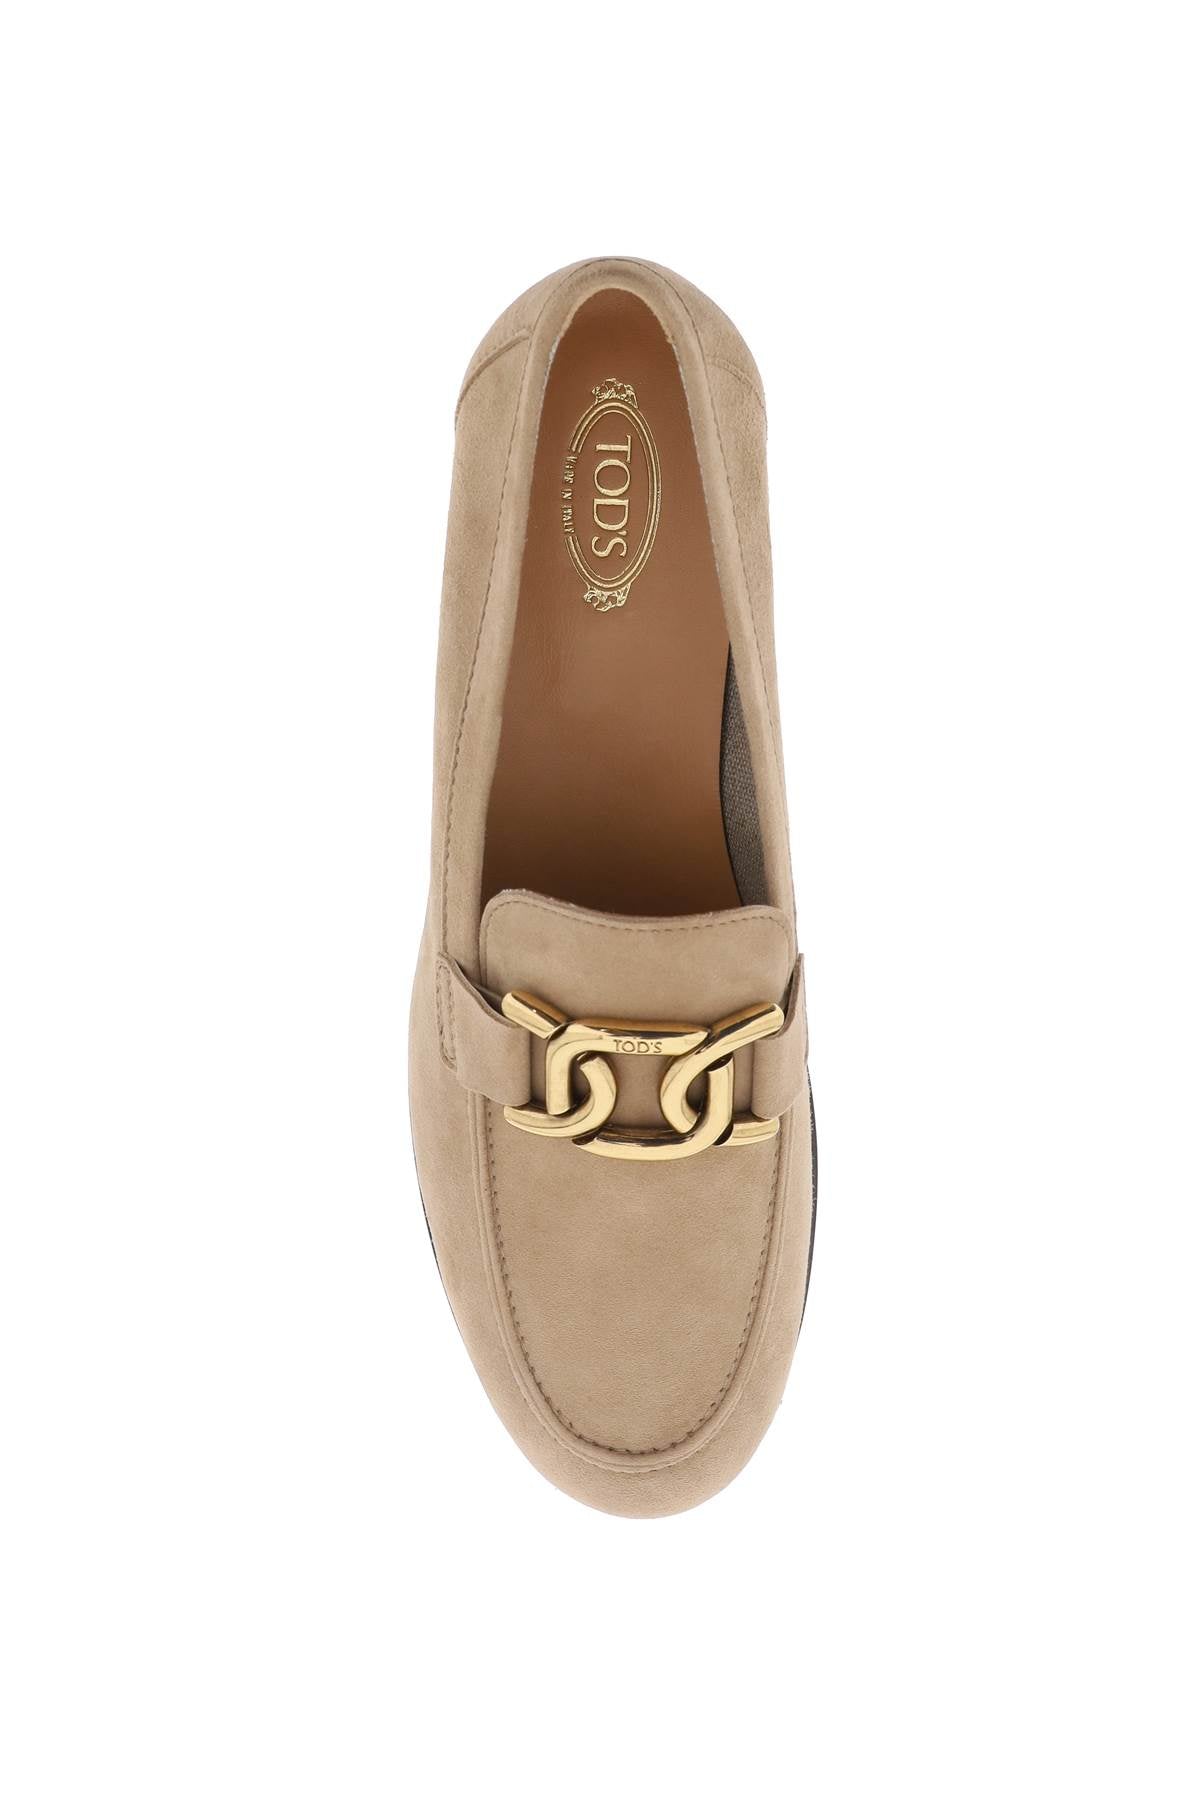 Tod's suede leather kate loafers in-women > shoes > loafers-Tod'S-Urbanheer